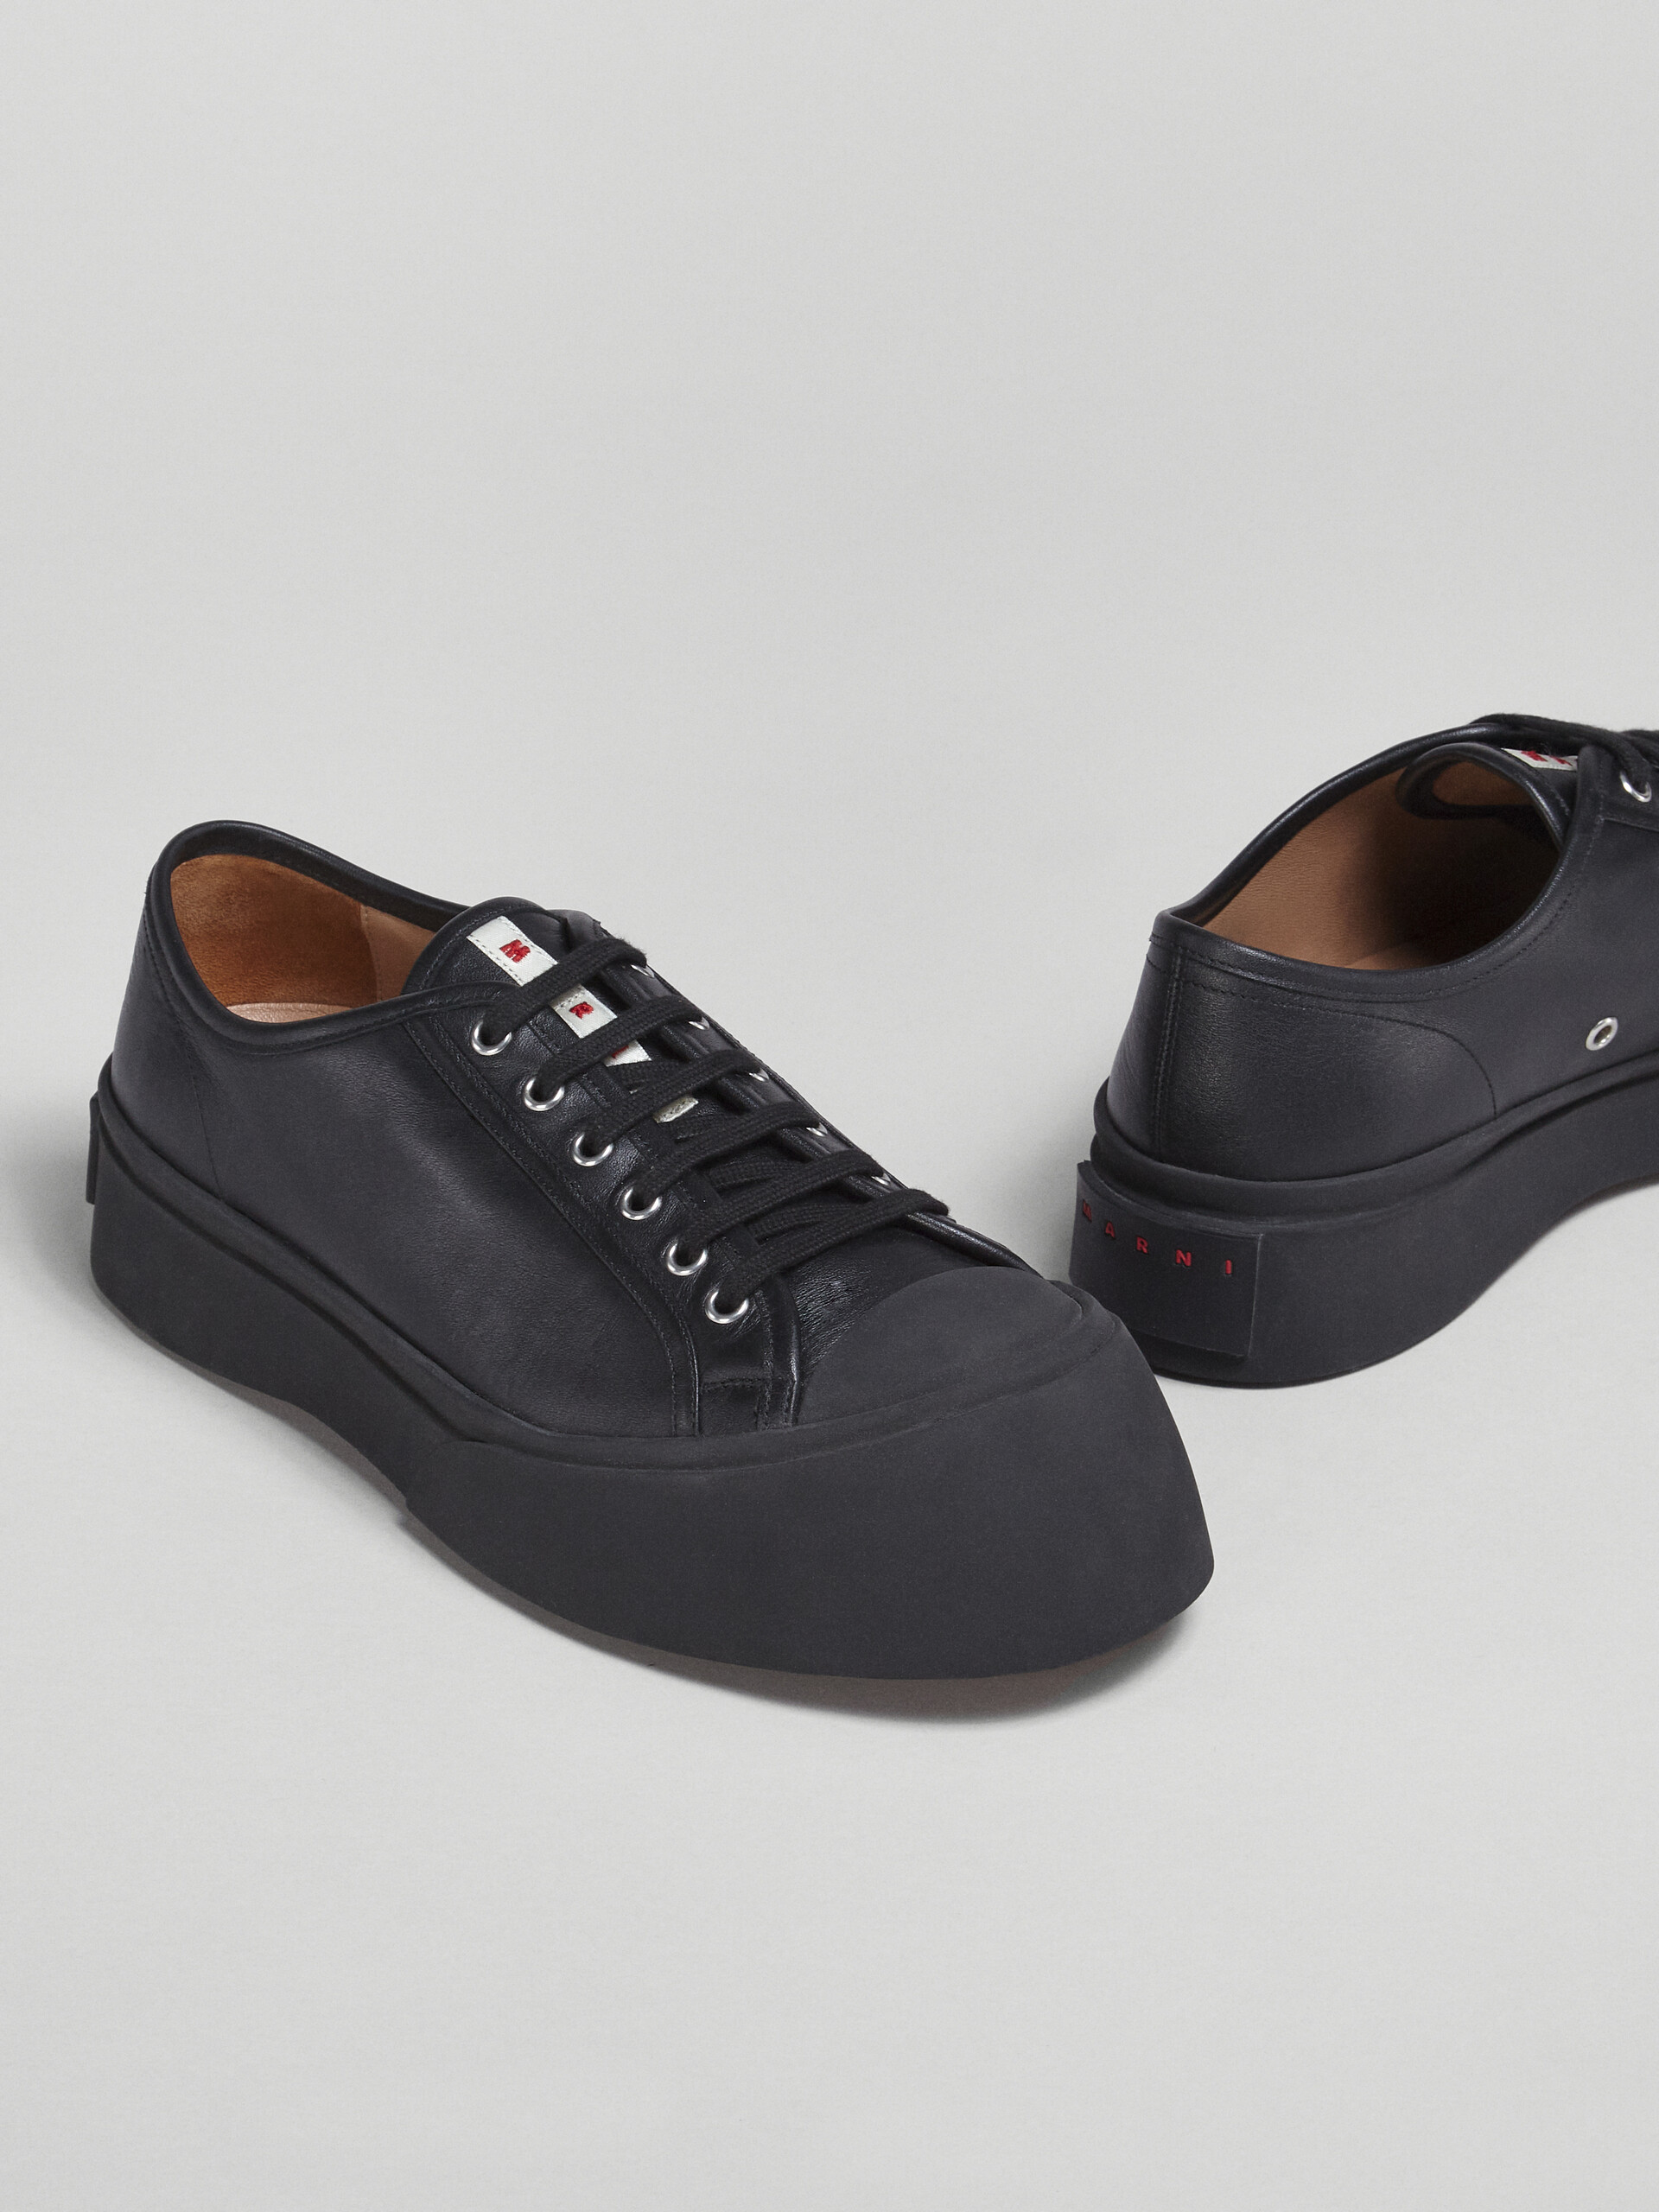 Soft calf leather PABLO sneaker - Sneakers - Image 5